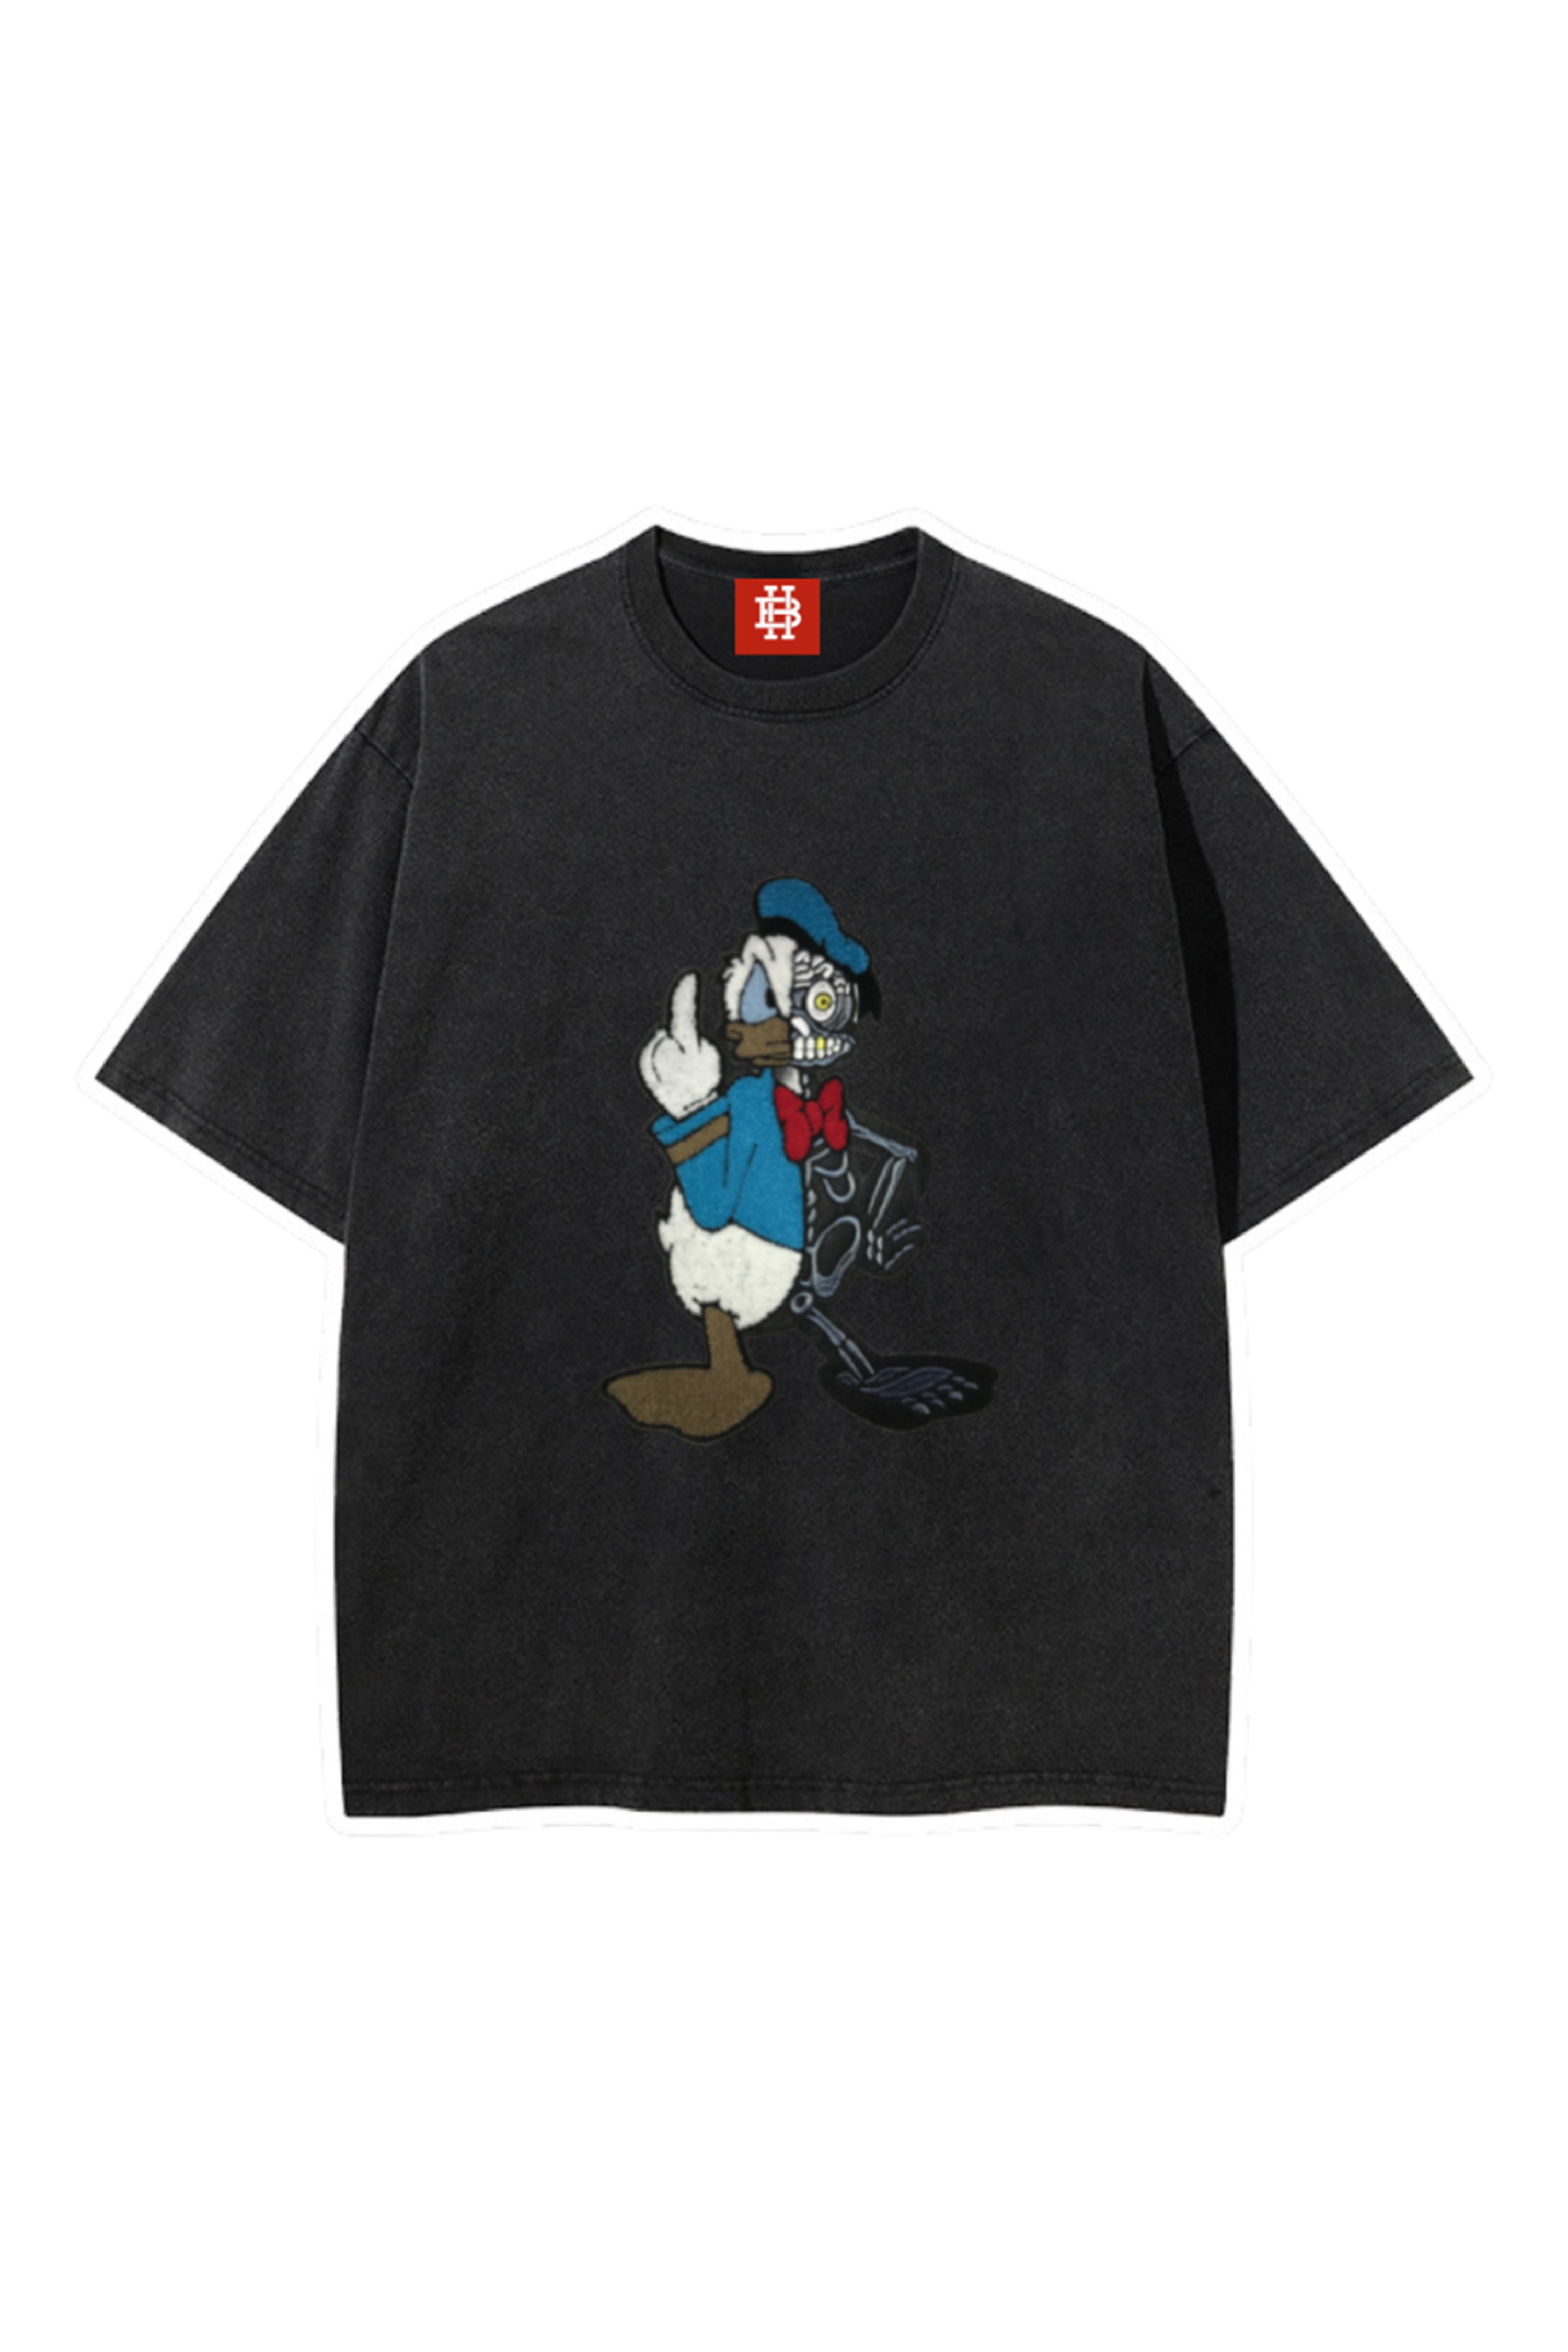 TWISTED DUCK CLASSIC T-SHIRT